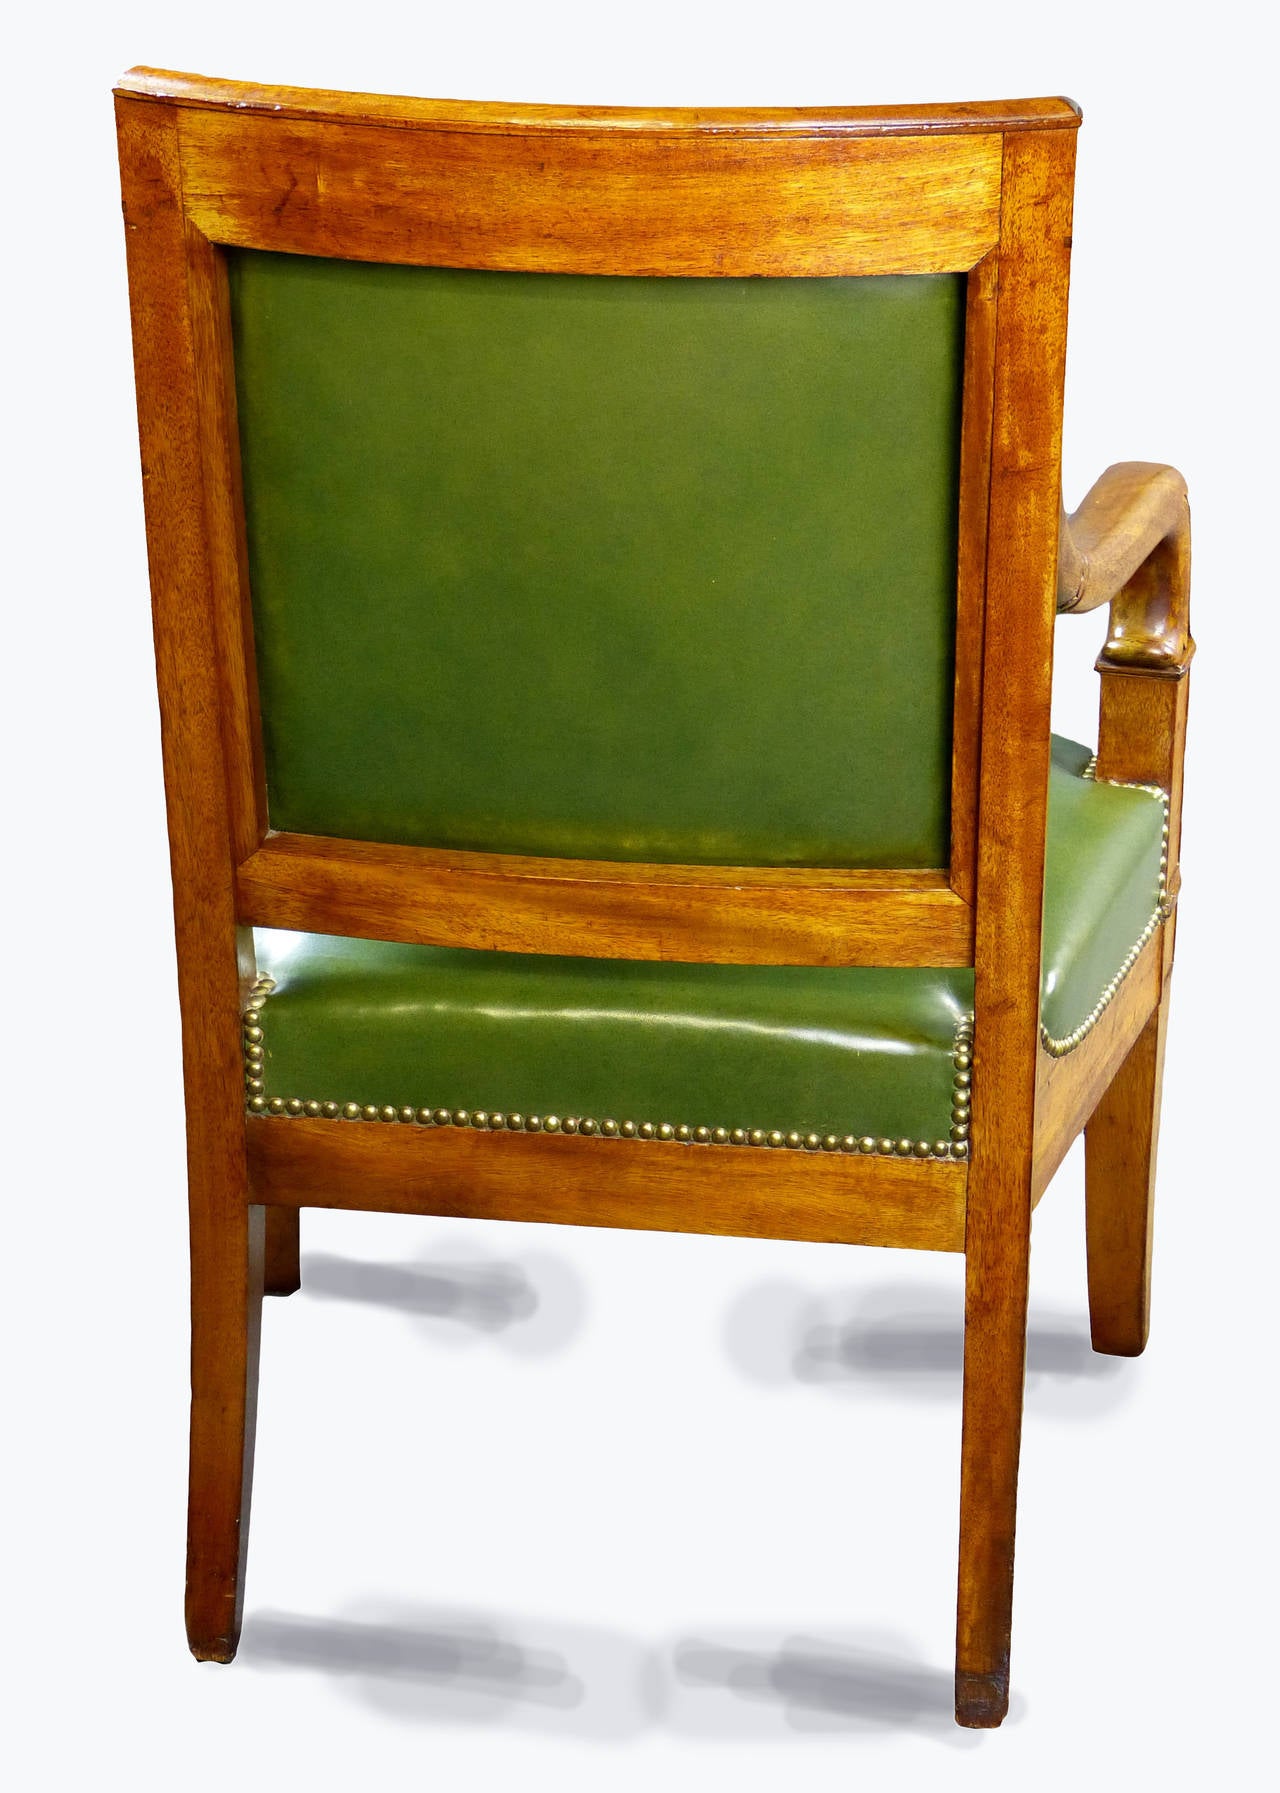 Mahogany Mid-19th Century French Louis Philippe Armchair with Green Leather For Sale